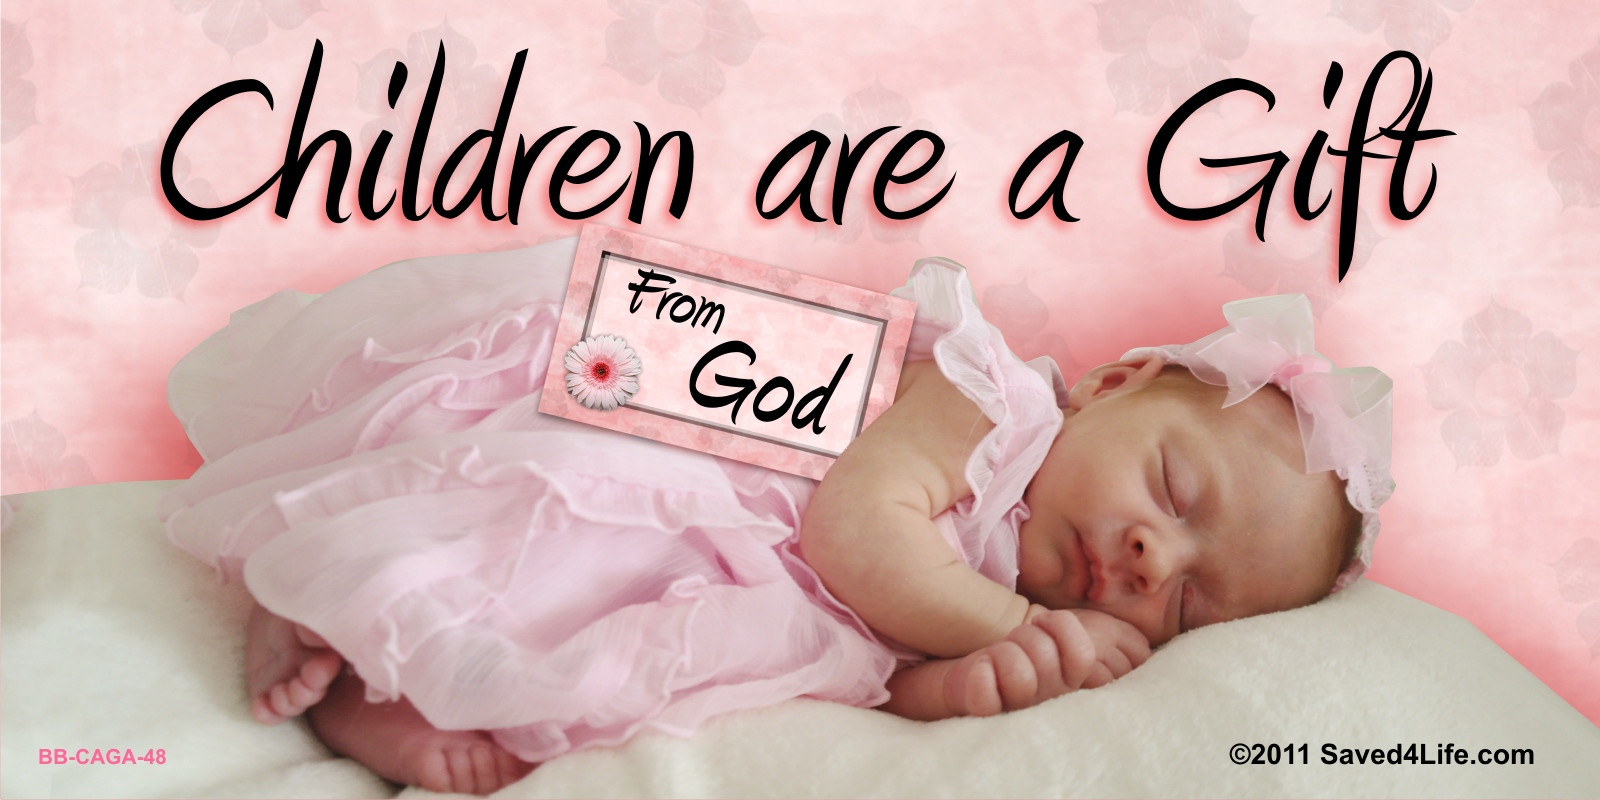 Children Gifts From God
 Just saw a gem of a bumper sticker childfree